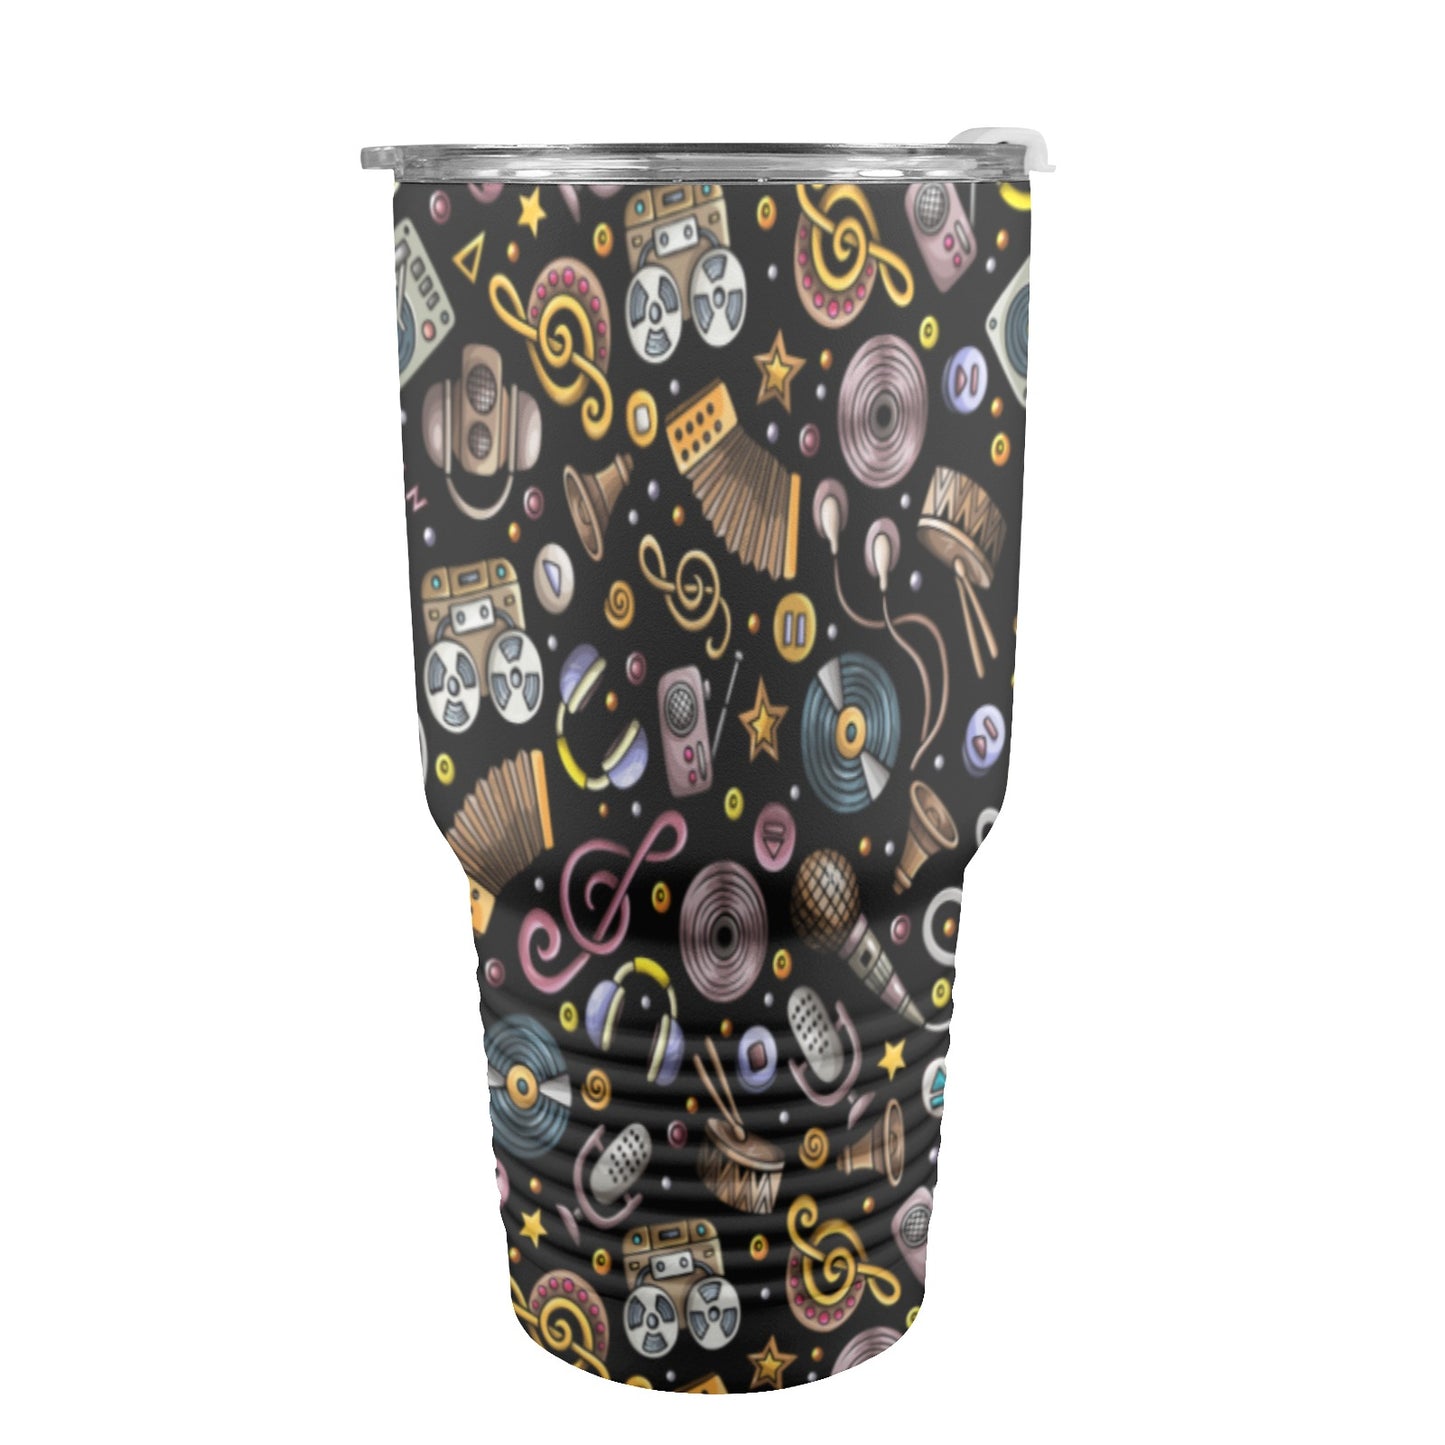 Retro Music Mix - 30oz Insulated Stainless Steel Mobile Tumbler 30oz Insulated Stainless Steel Mobile Tumbler